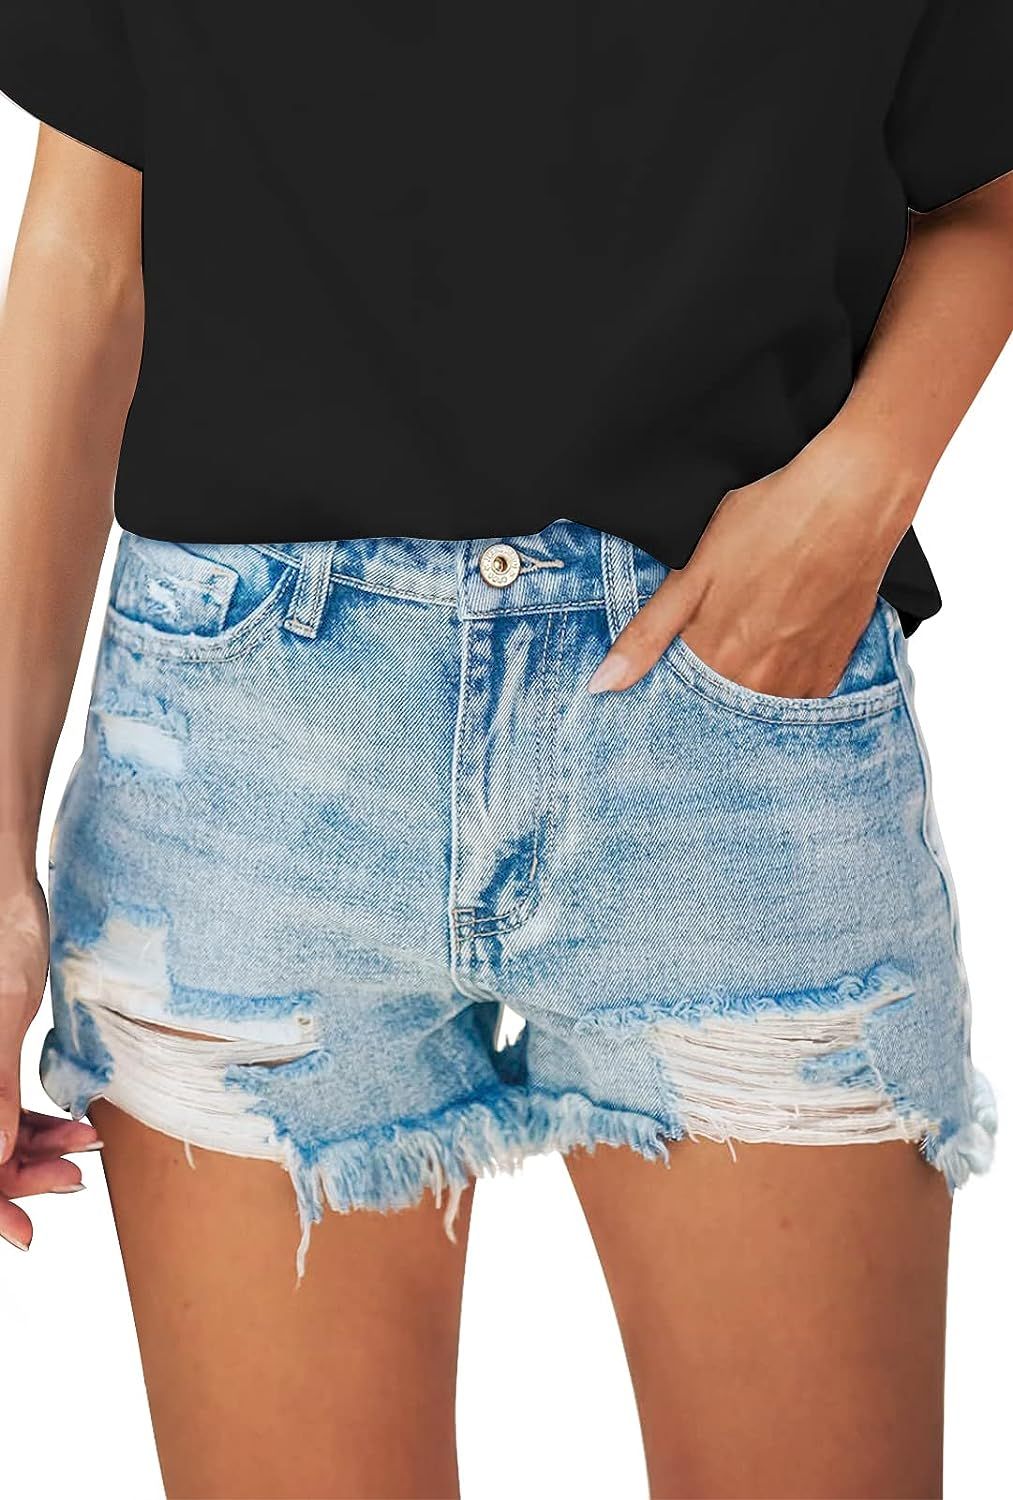 DYLISEA Womens Jean Shorts High Waisted Ripped Distressed Cut Off Frayed Denim Jean Shorts for Wo... | Amazon (US)